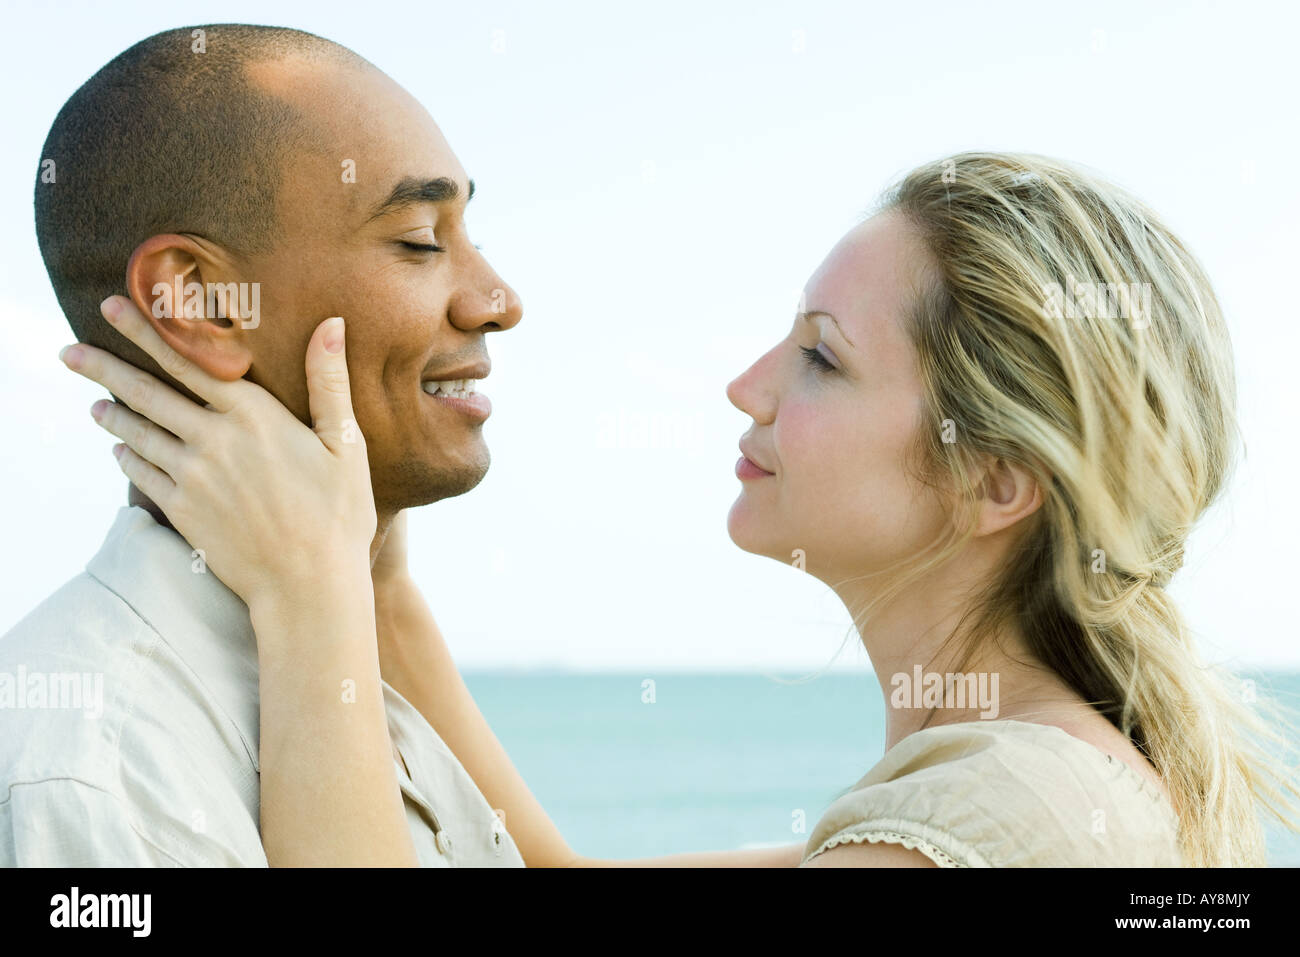 Couple face to face, woman holding man's neck, side view Stock Photo